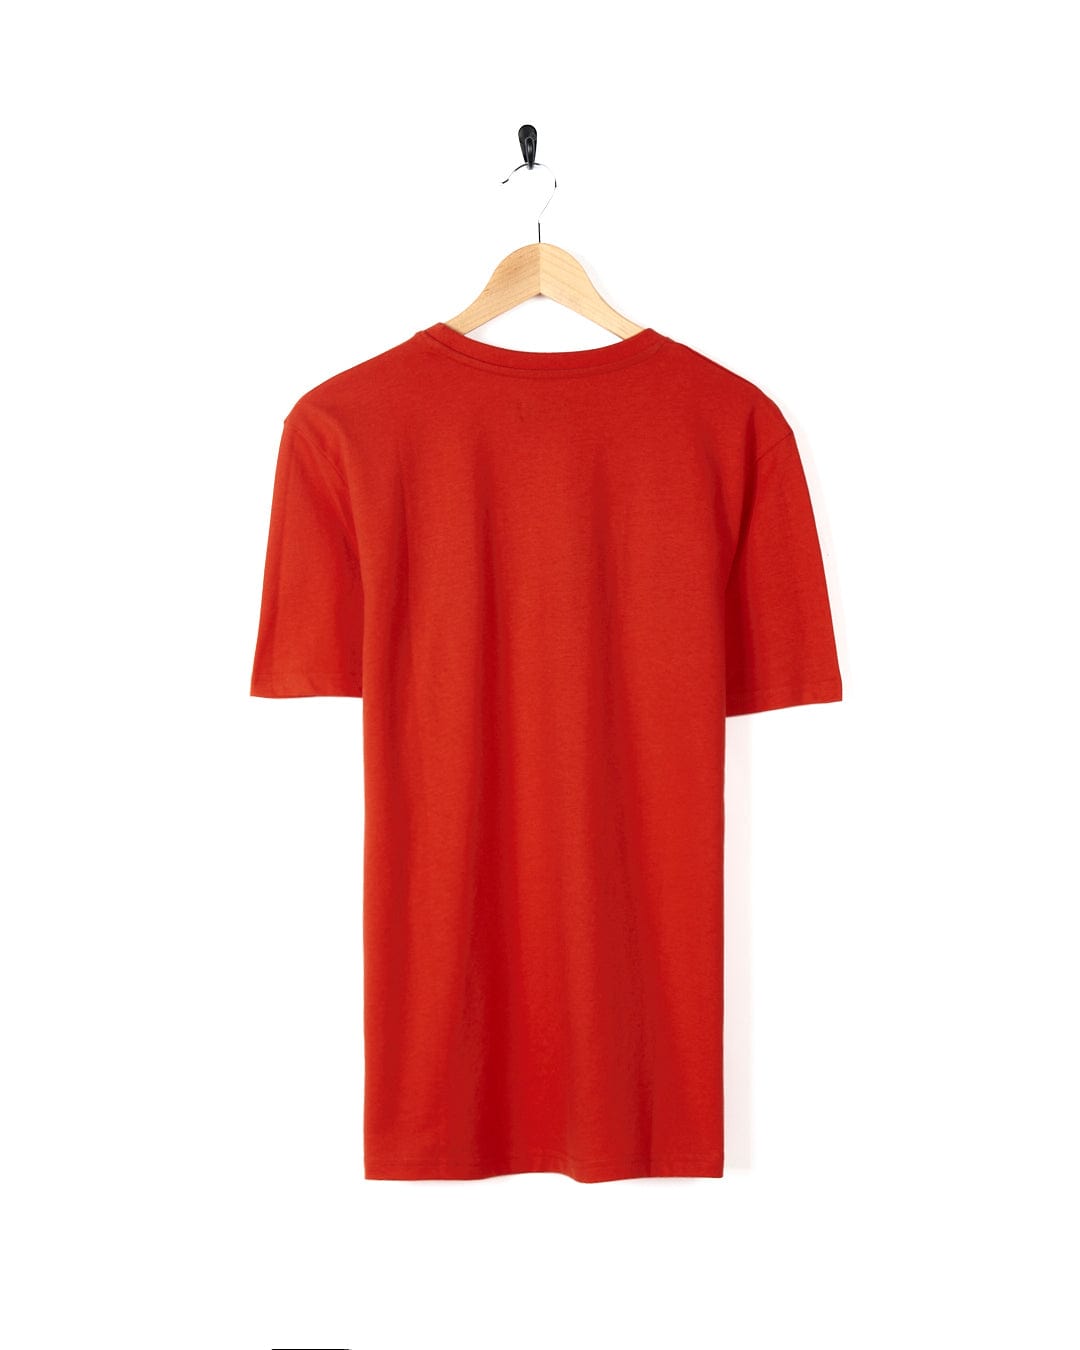 A Retro Carve - Mens Short Sleeve T-Shirt - Red by Saltrock with a retro stripe design hanging on a hanger.